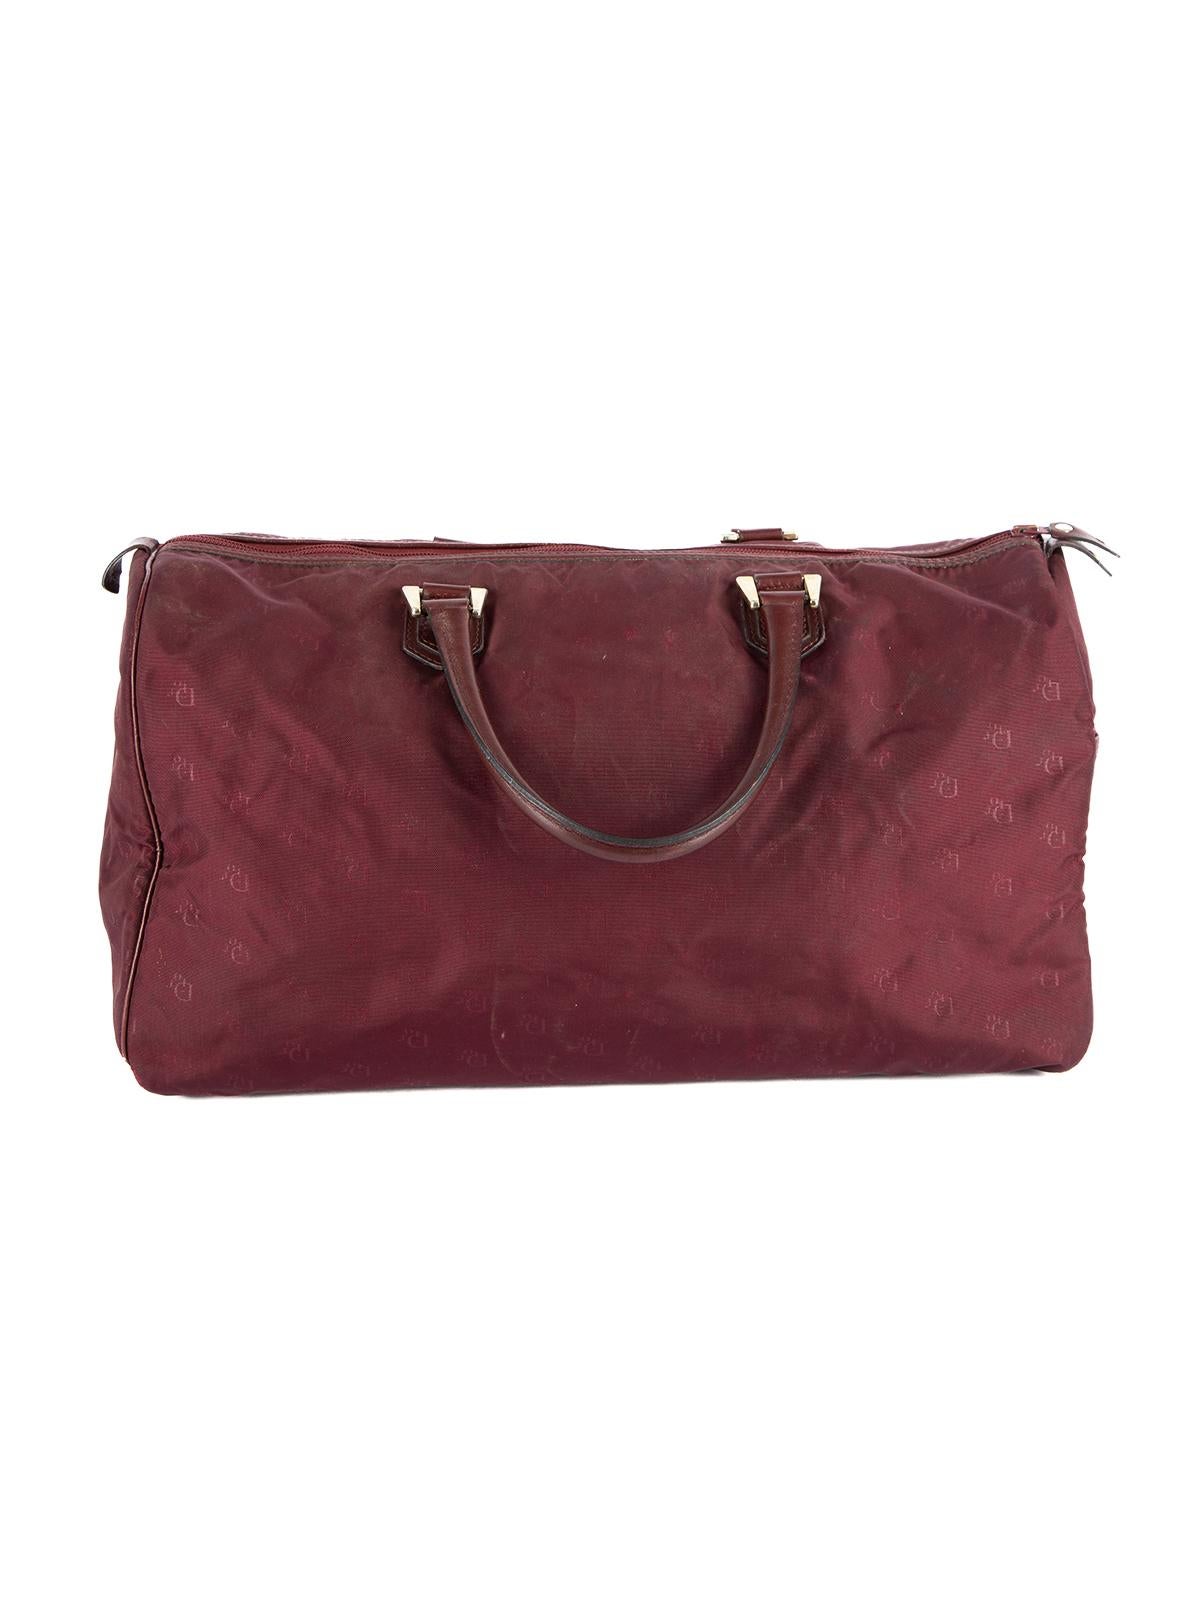 Dior Women's Vintage Burgundy Trotter Duffle Bag In Good Condition For Sale In London, GB